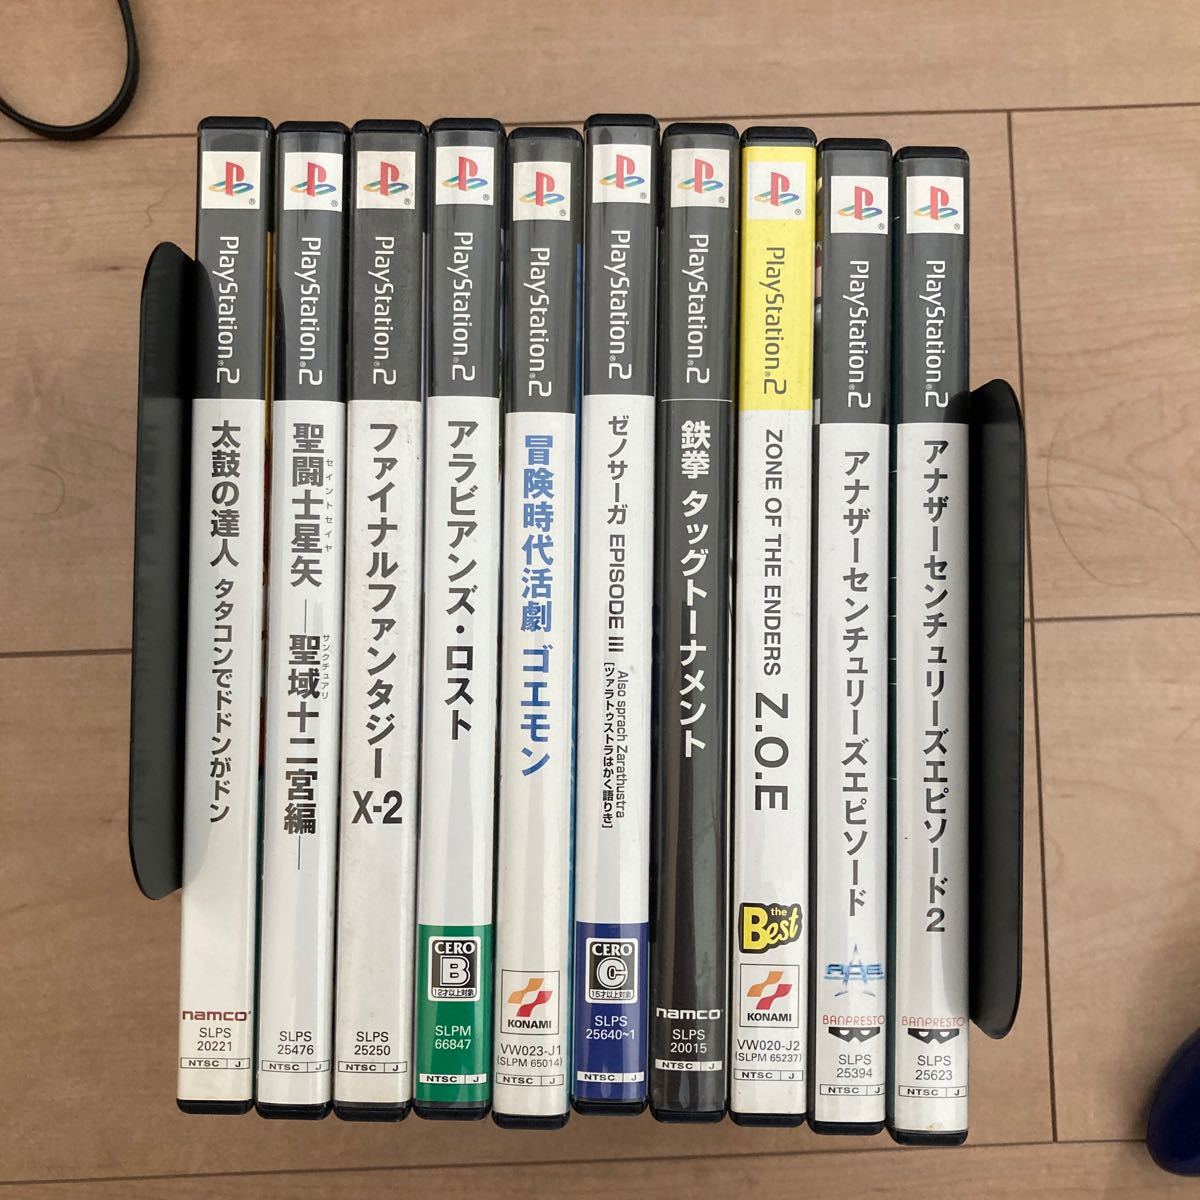 PS2 SCPH-39000難あり & ソフト10点セット